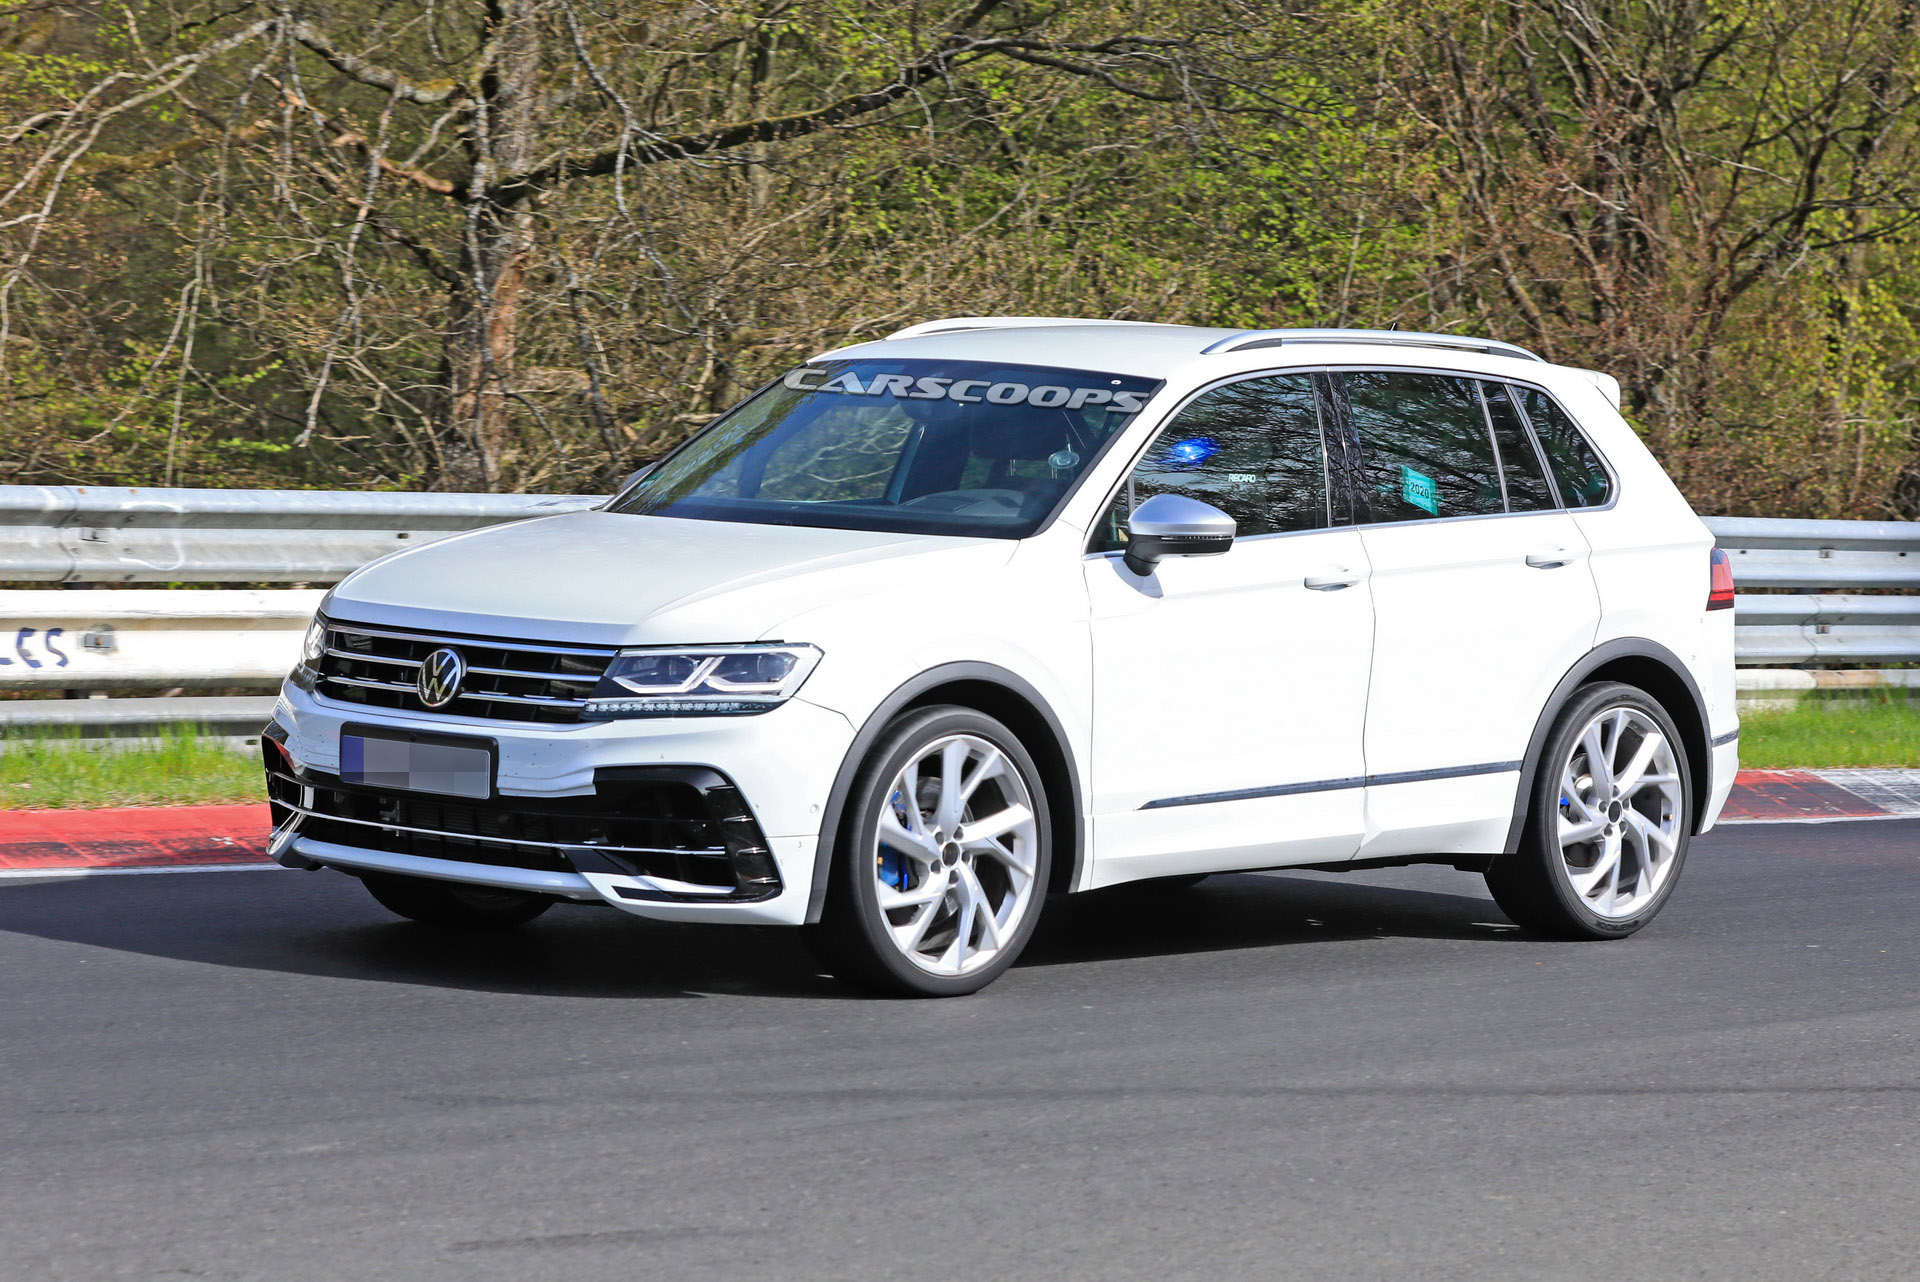 2021 Volkswagen Tiguan R Flexes Its Muscles On The ...